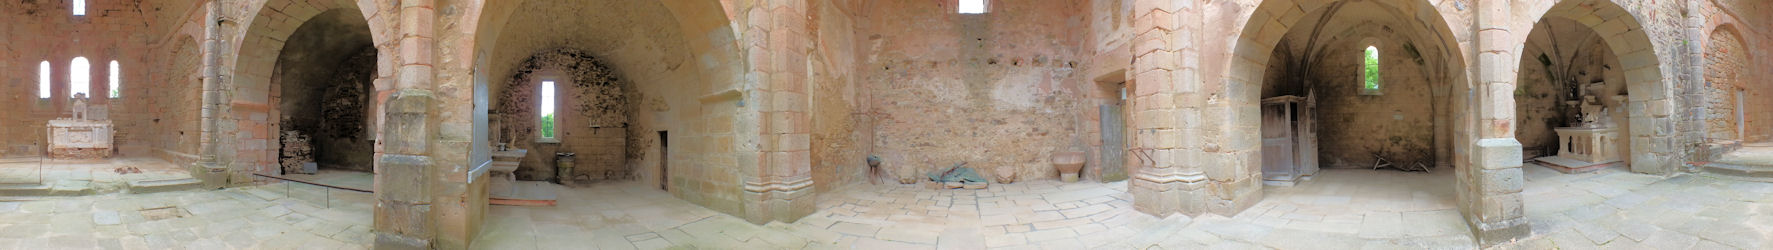 Panorama of the inside of the church (360 degree view)